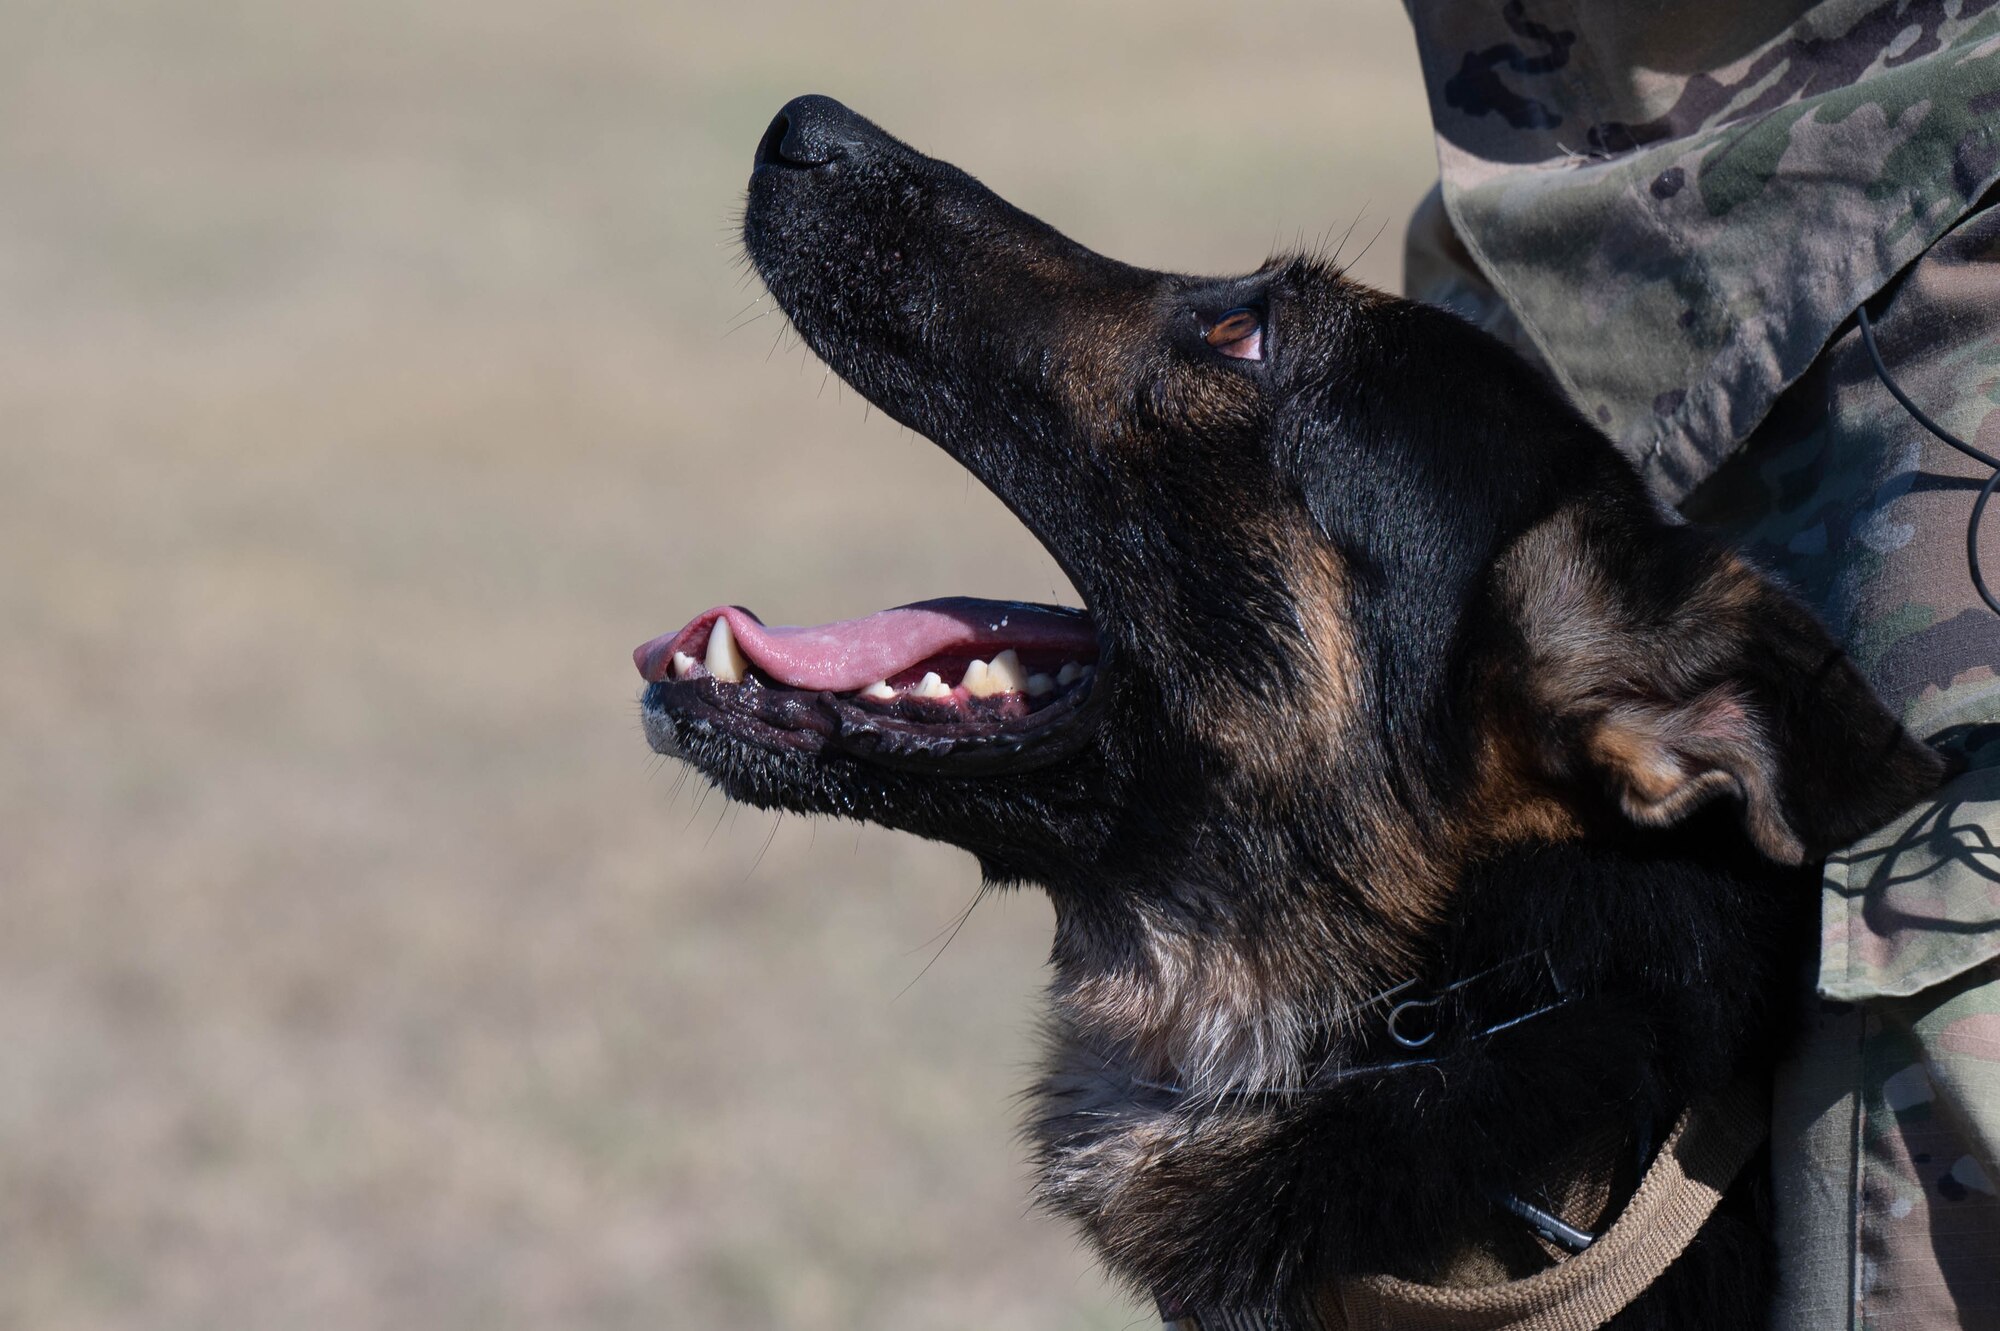 JBSA-Randolph dog handlers continue the mission > Air Education and Training Command > Article Display